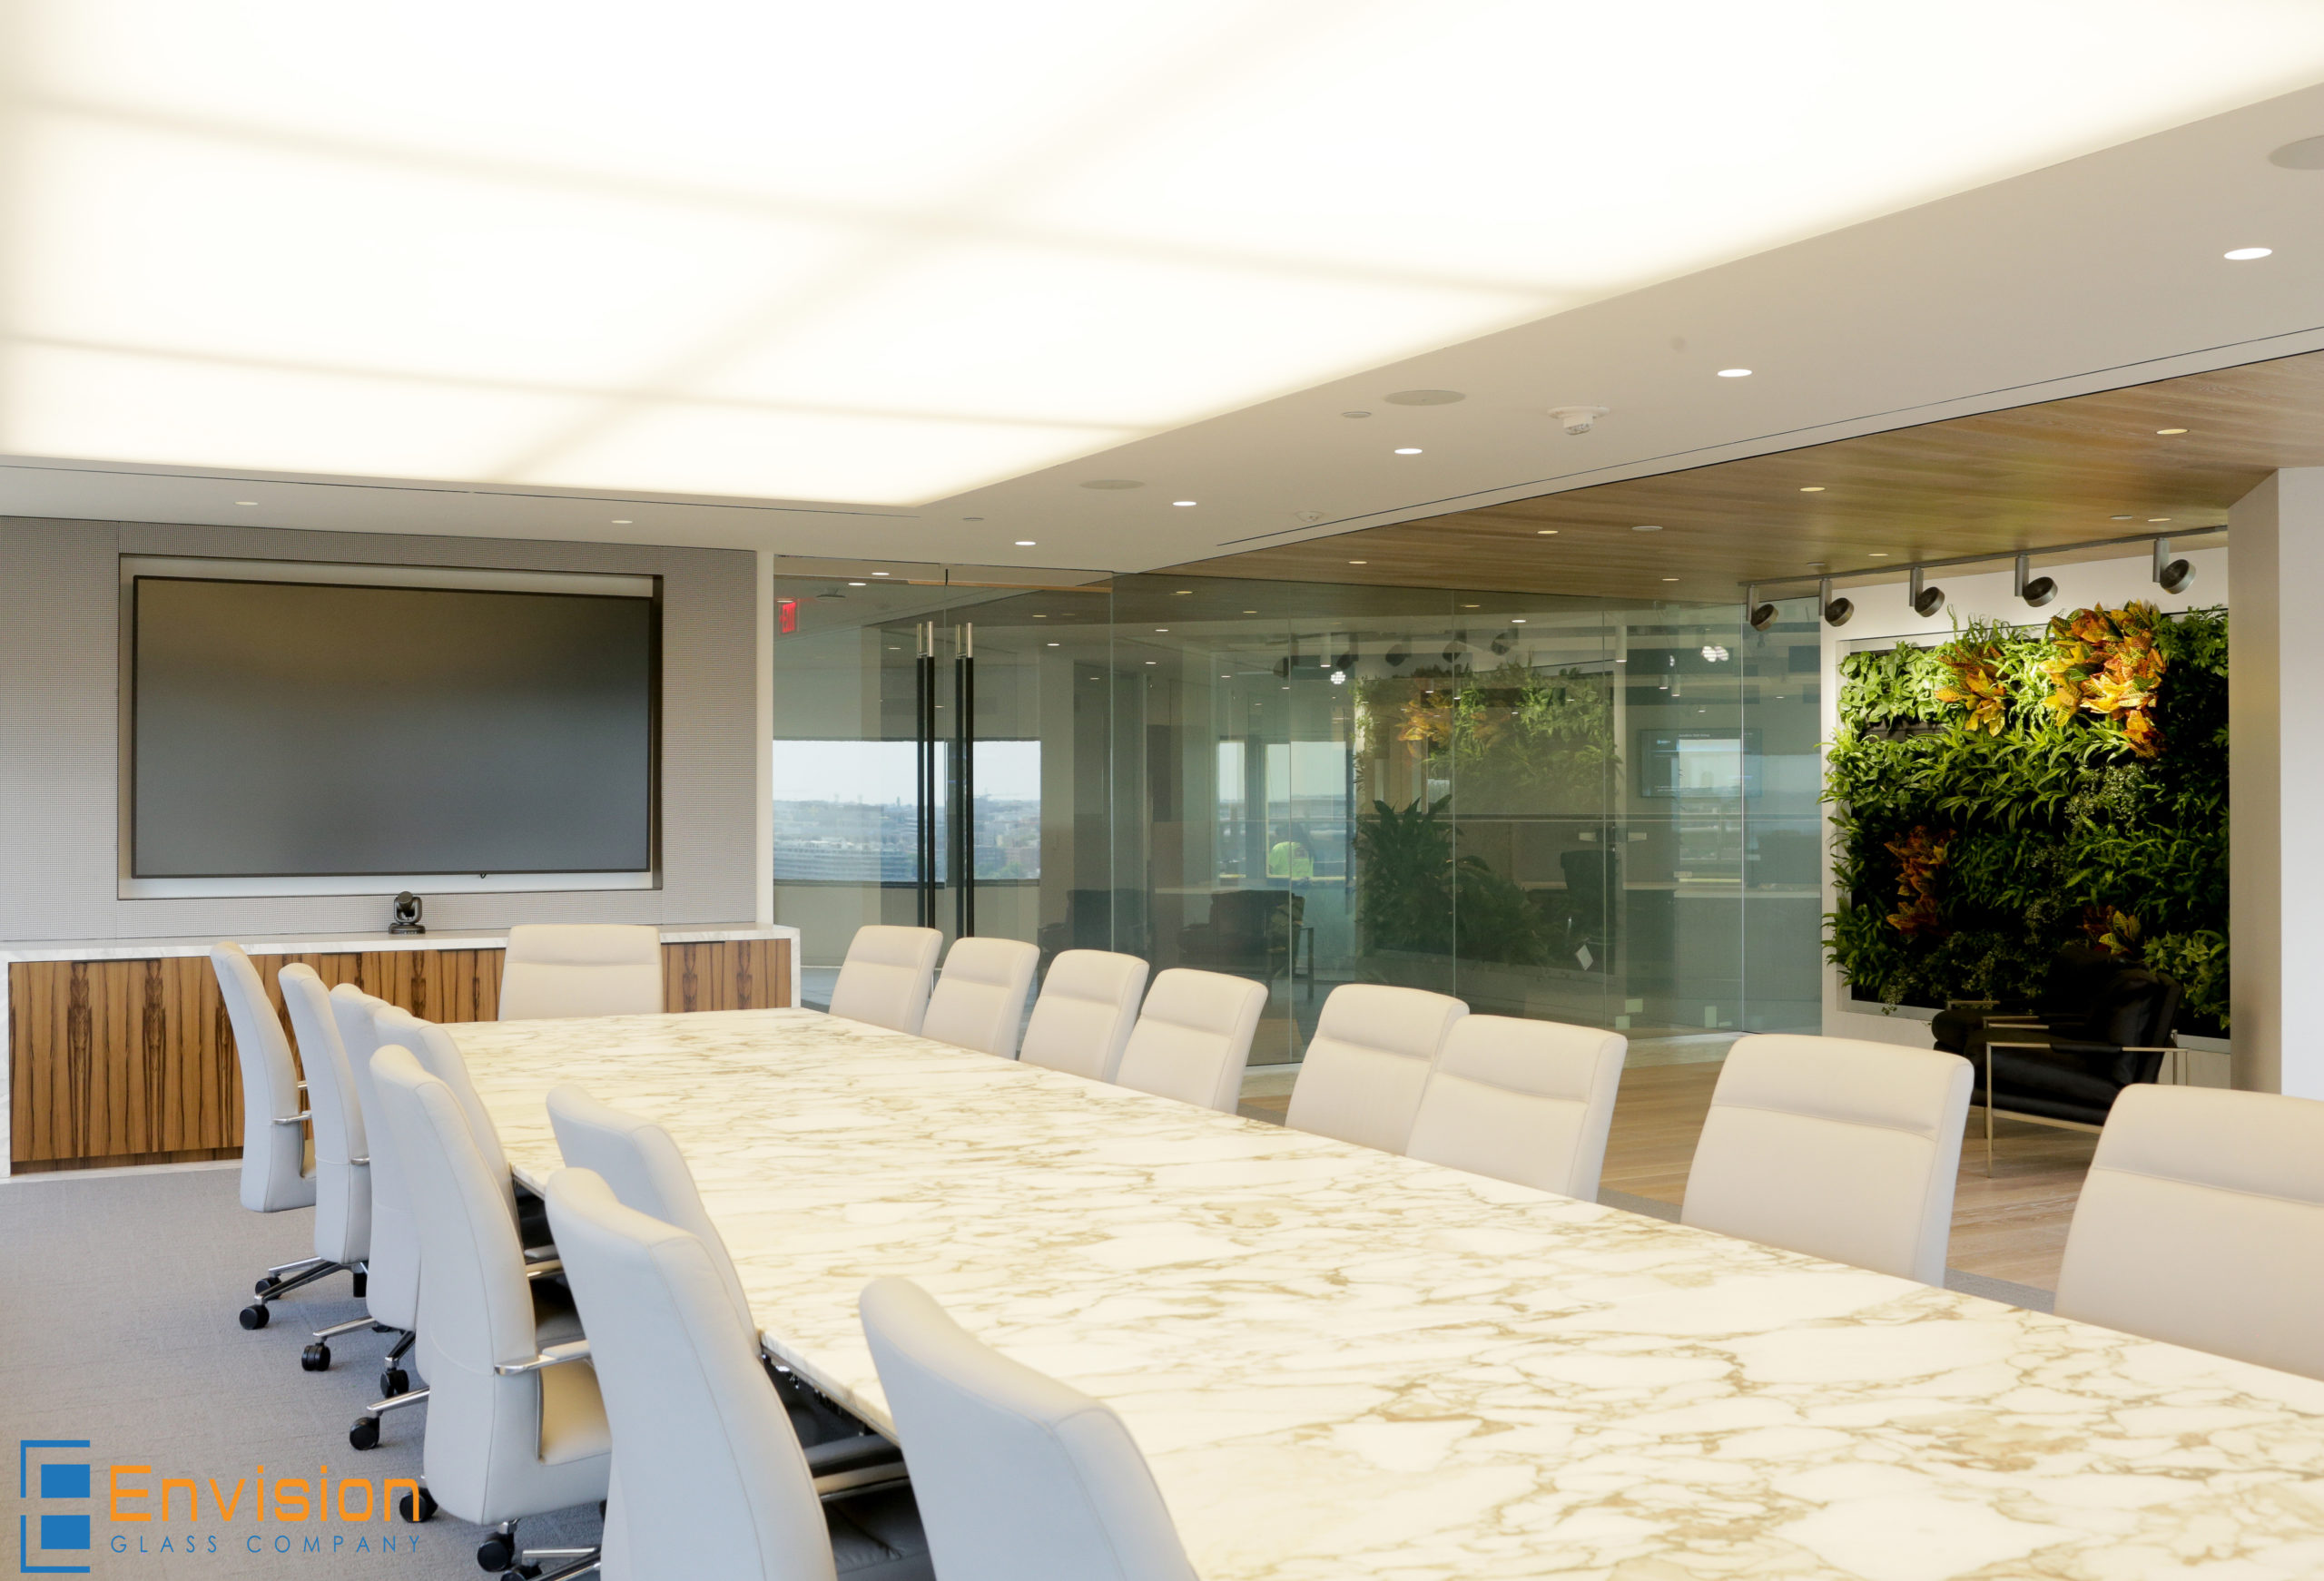 The Venture Global conference room.